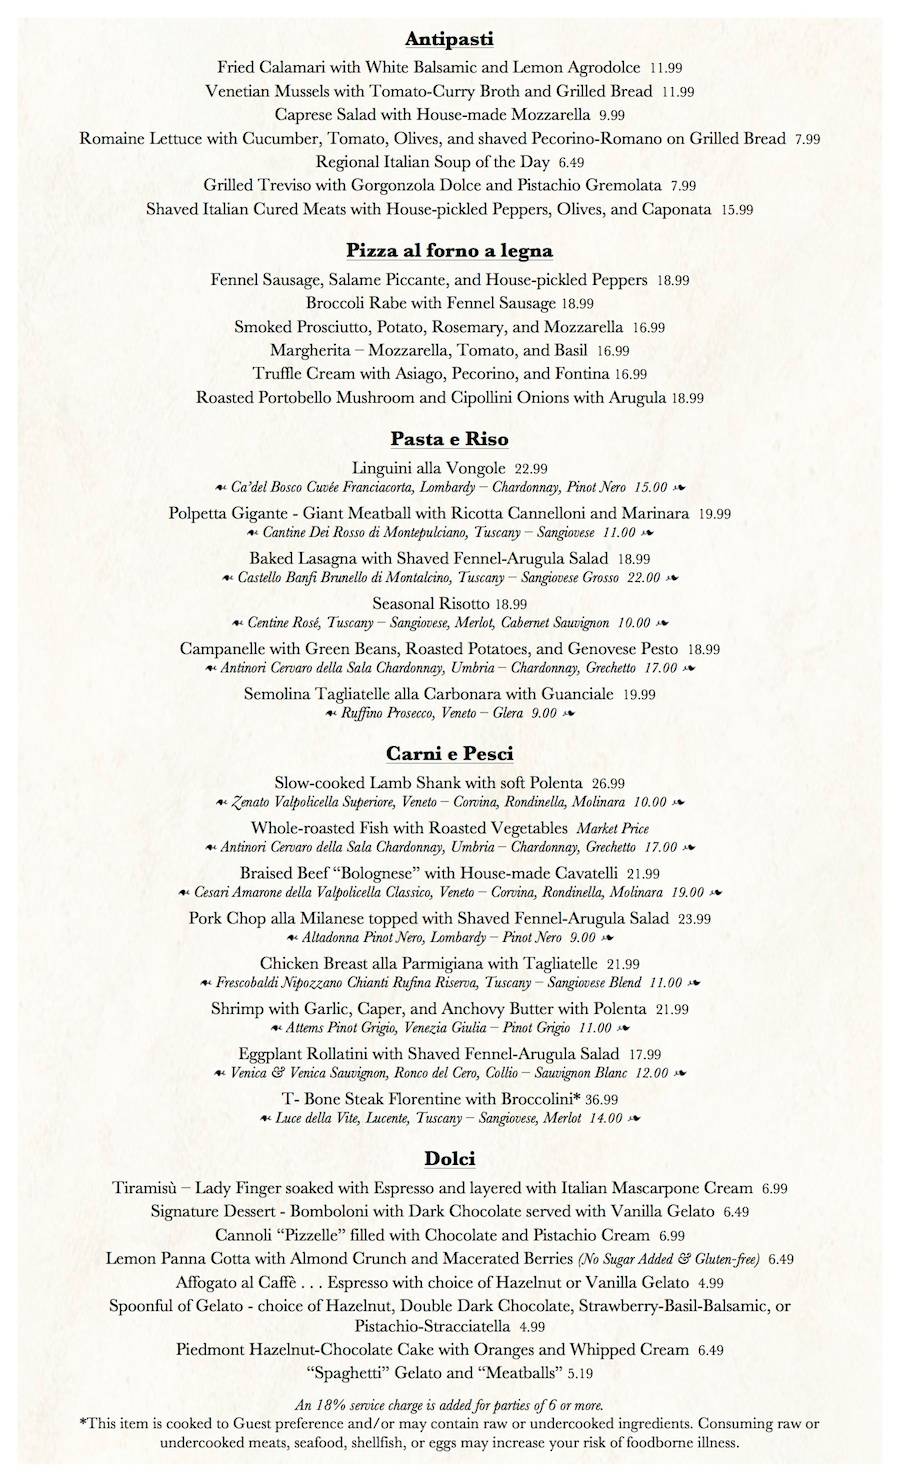 Breakfast menu now available for Trattoria al Forno - opening in December on the BoardWalk